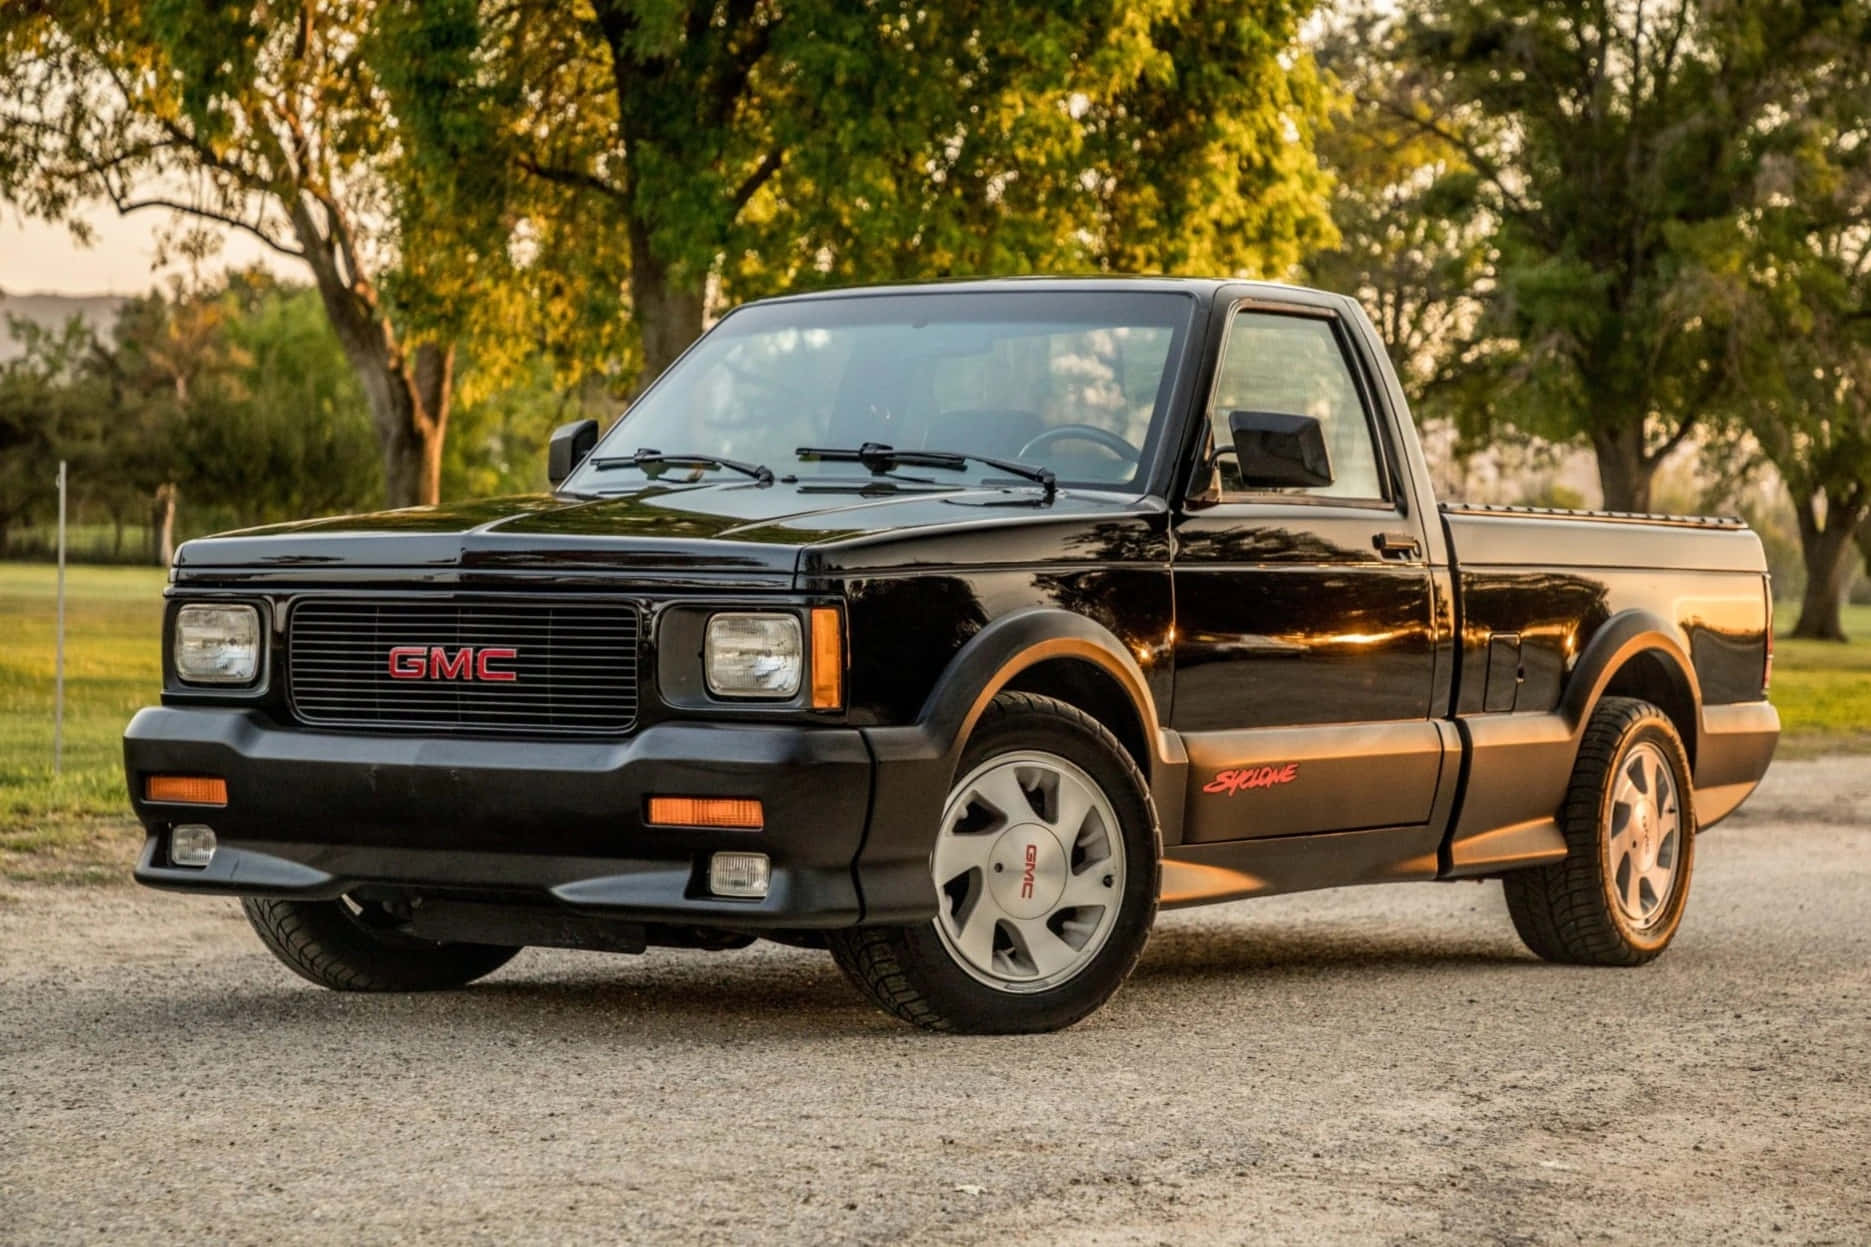 A stunning GMC Syclone in action Wallpaper